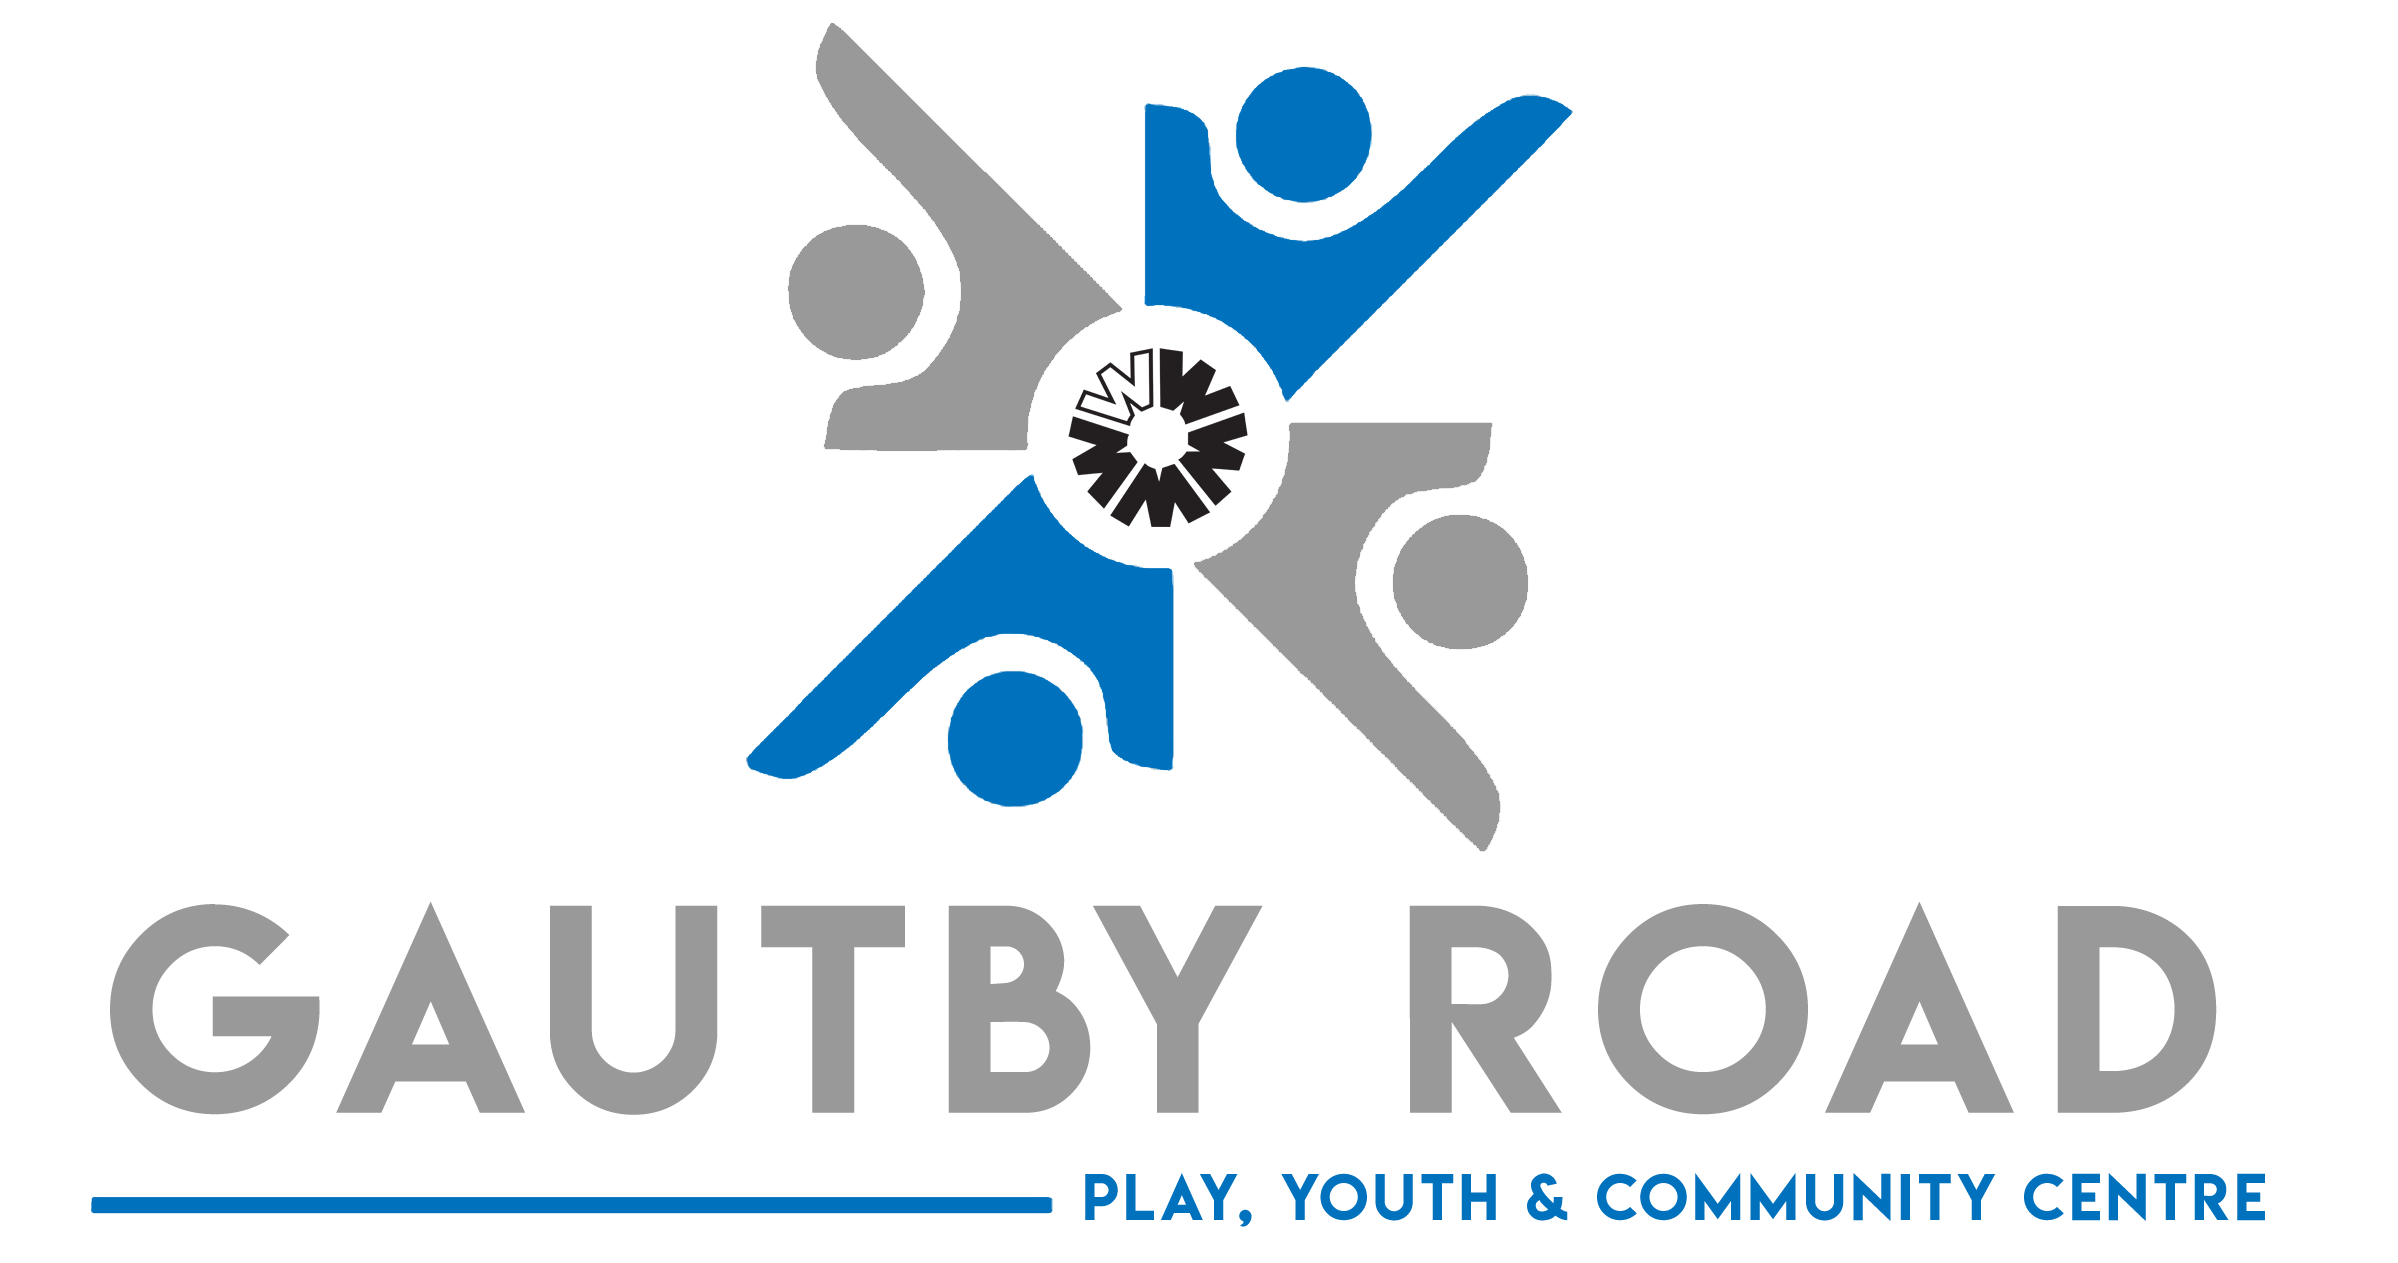 Gautby Road - Play, Youth and Community Centre